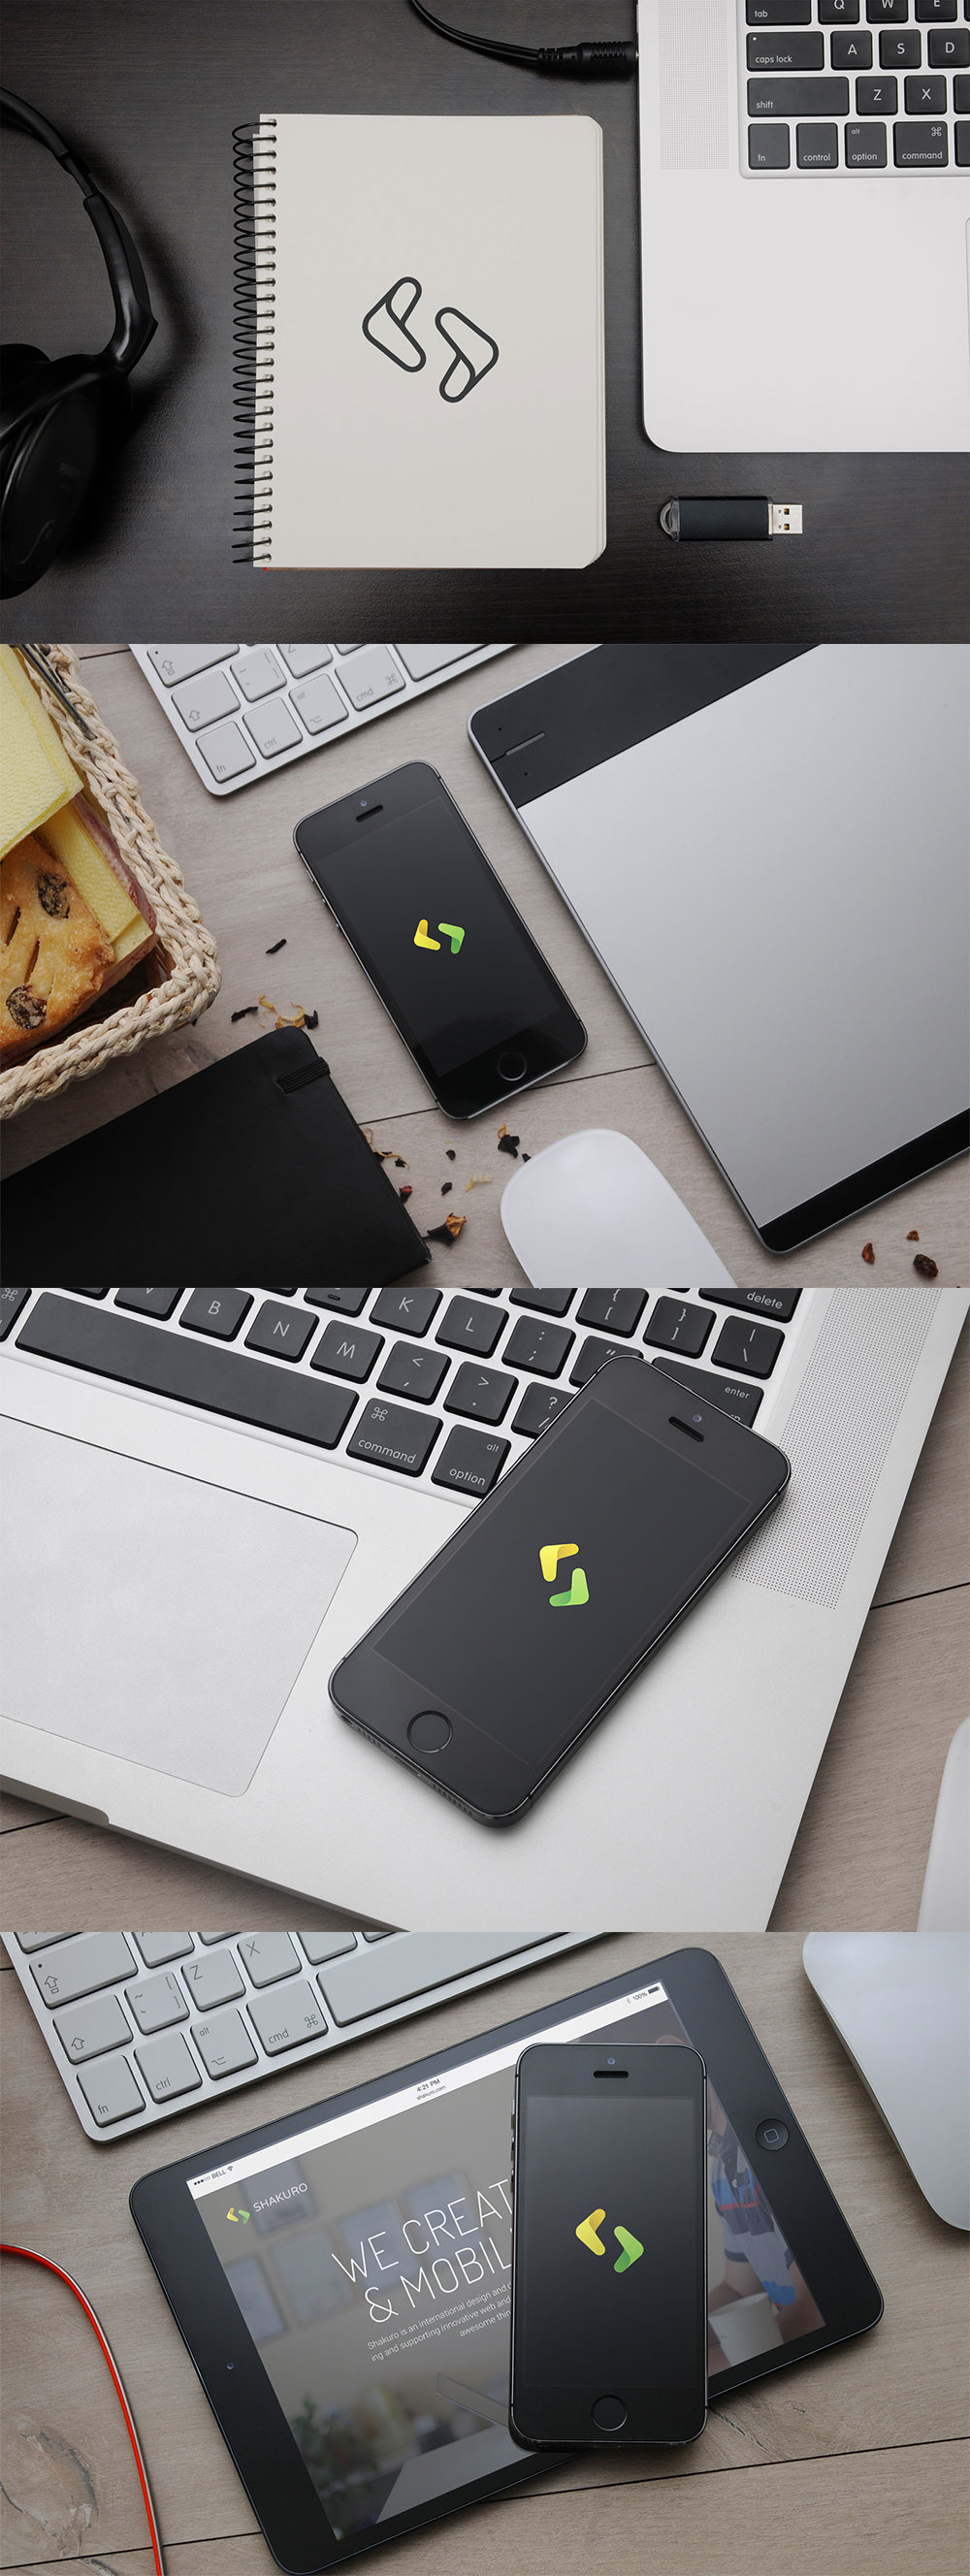 iphone-notebook-tablet-free-mockups